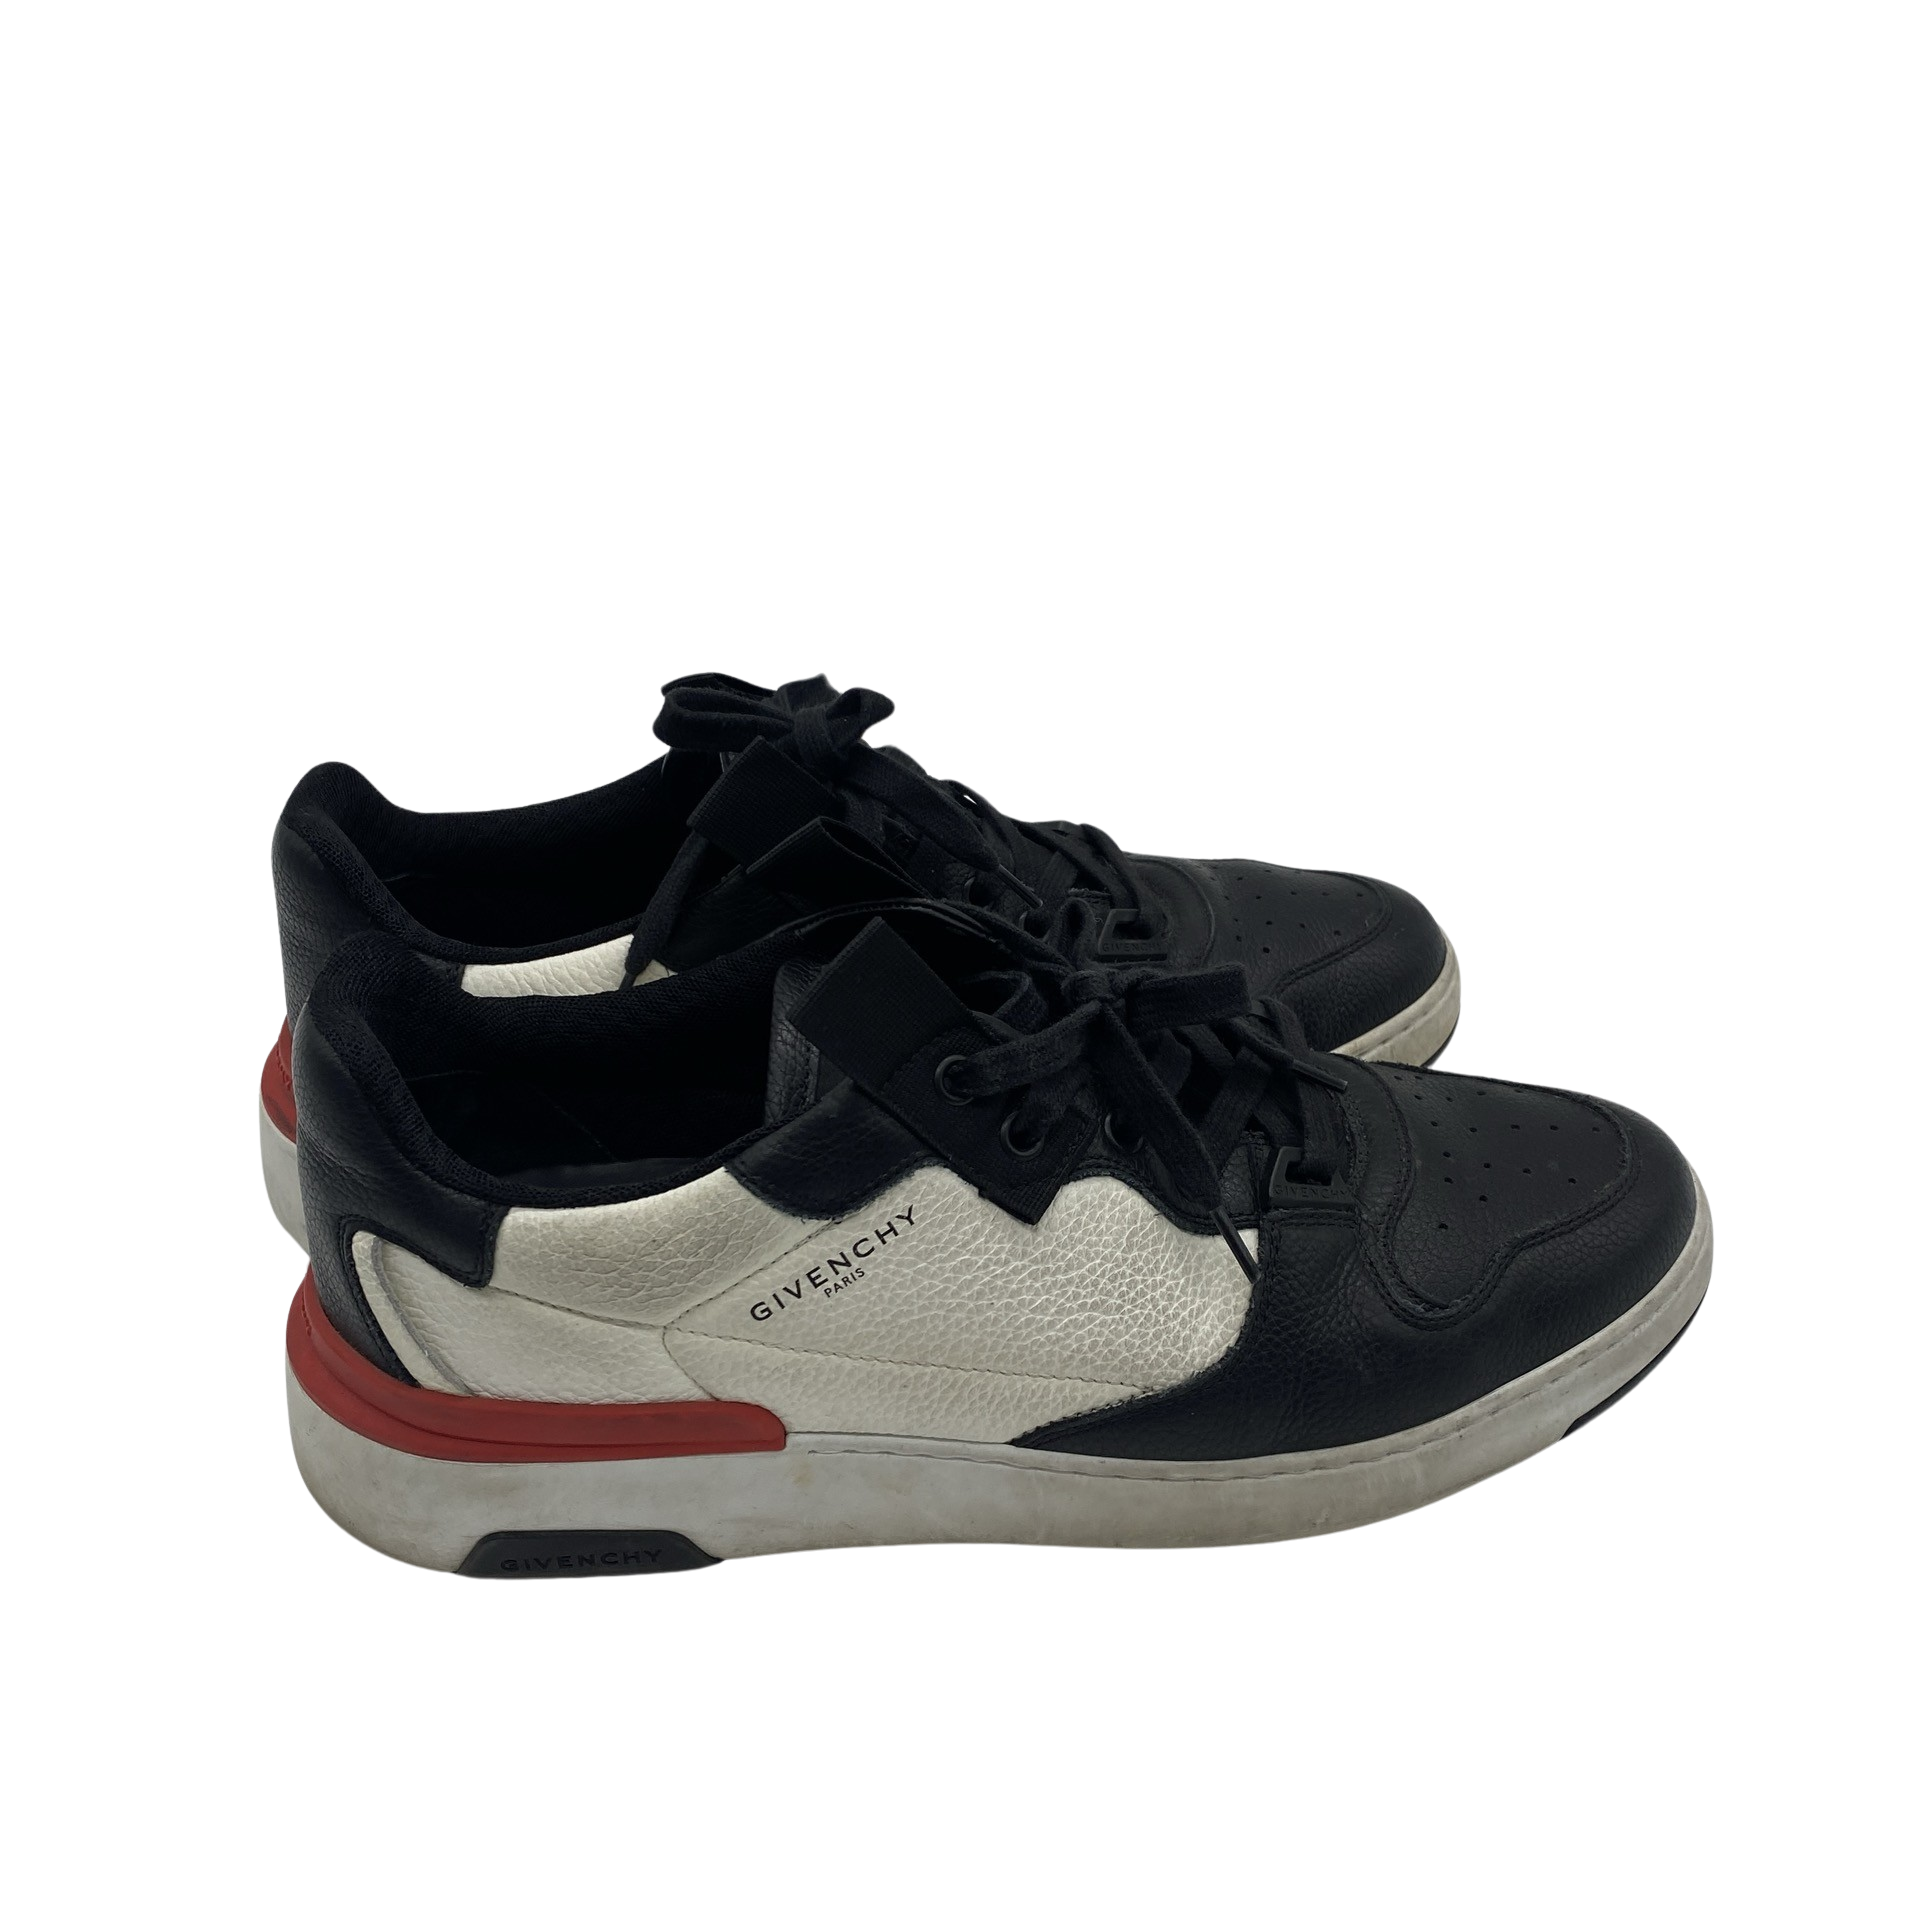 Tenis Givenchy T.42